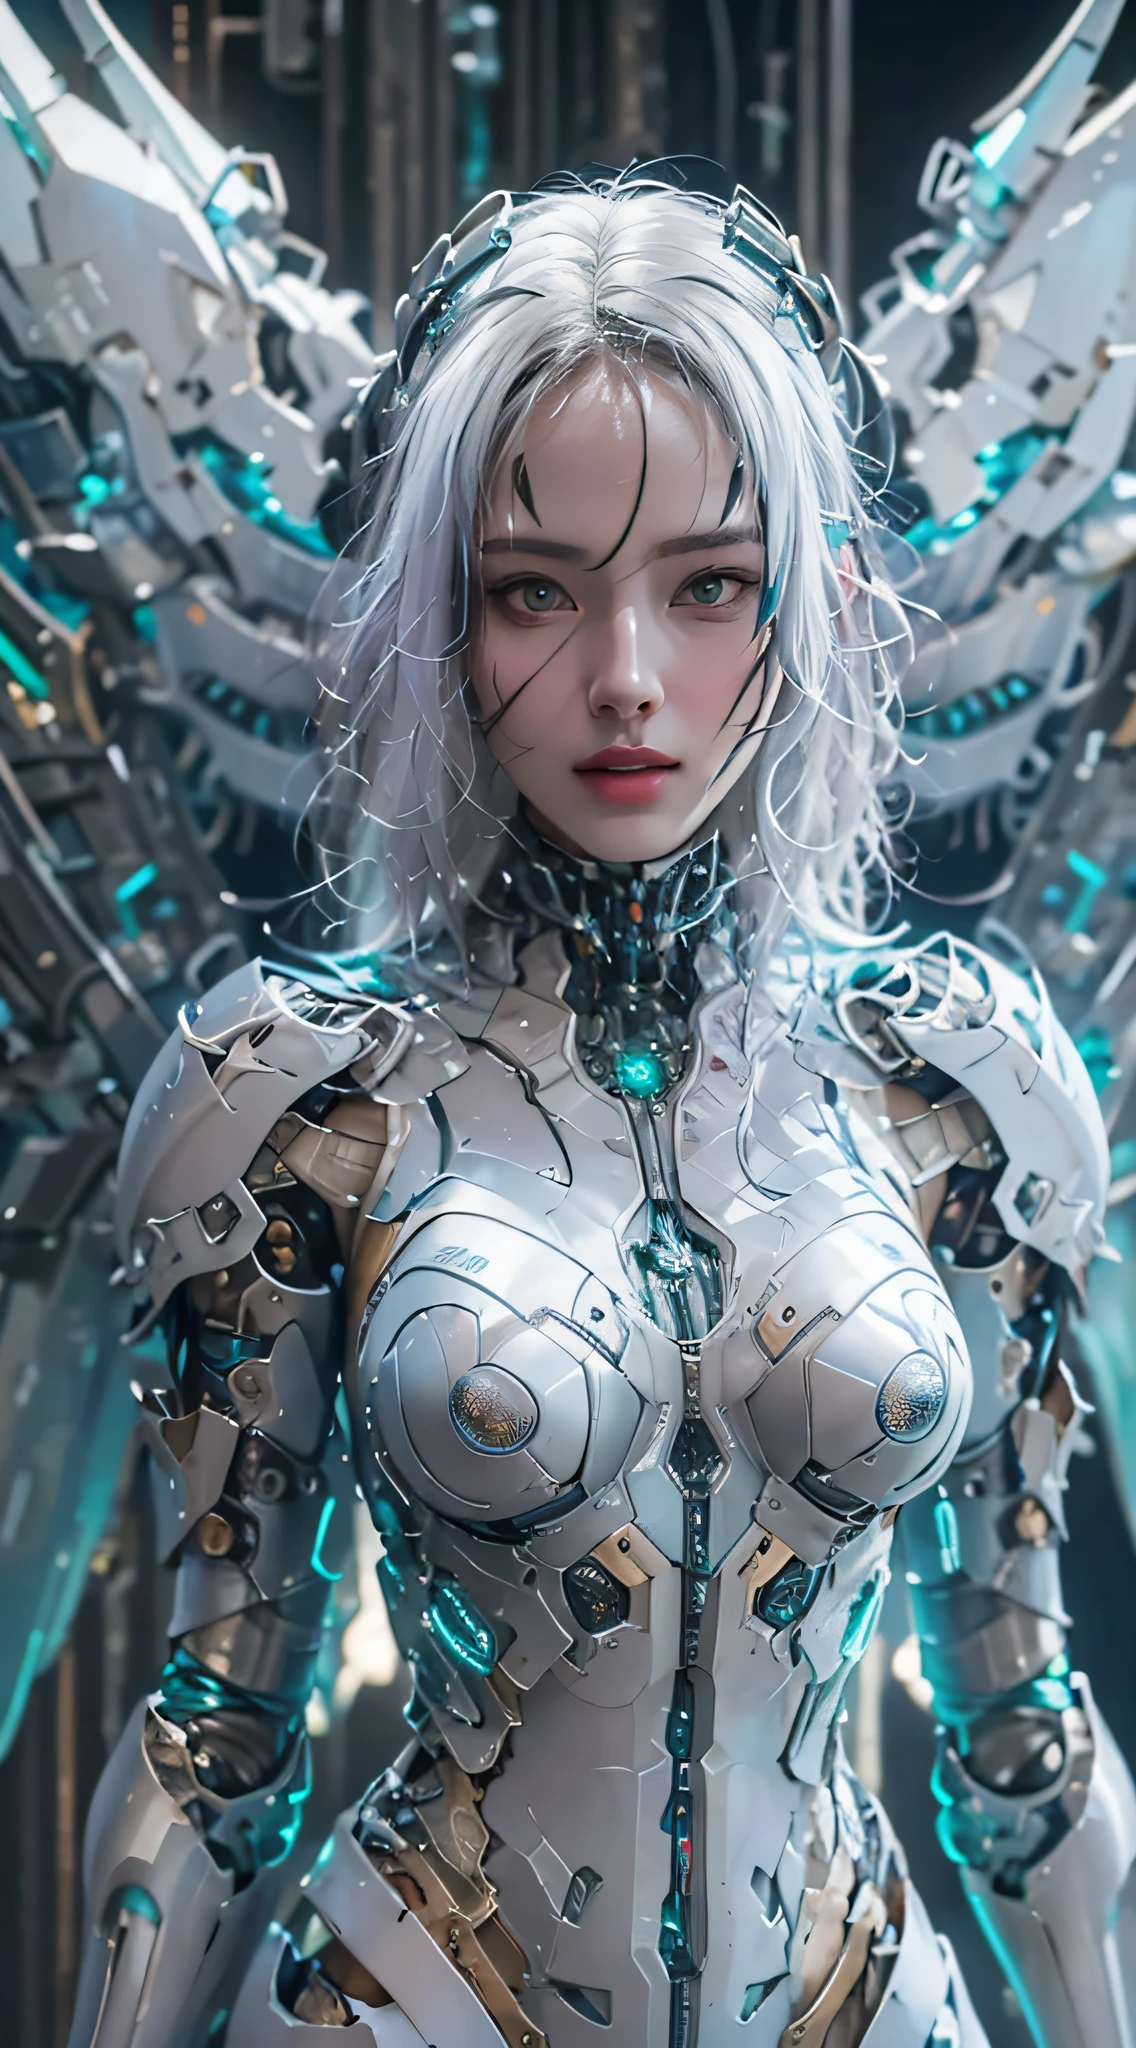 Top  Quality、​masterpiece、超High Resolution A、(Photorealcitic:1.4)、Raw foto、Cyborg Angel、Large wings made of metal、White porcelain body、white haired、wlop glossy skin、1 Cyborg Girl、((ultra-realistic detail))、portlate、Global Illumination、shadowy、octan render、8K、UltraSharp、Character edge light, huge、Raw skin is exposed to the valley、Detail of Intricate Ornaments、Transparent transparent part、Detailed hydraulic cylinders from Sumer、Compact LED lamps、highly intricate details、Realistic light、Purple eyes、luminous eyes、Facing the camera、neon details、cowboy shots、Futuristic headgear、About Cyberpunk、Female Elf Cyborg